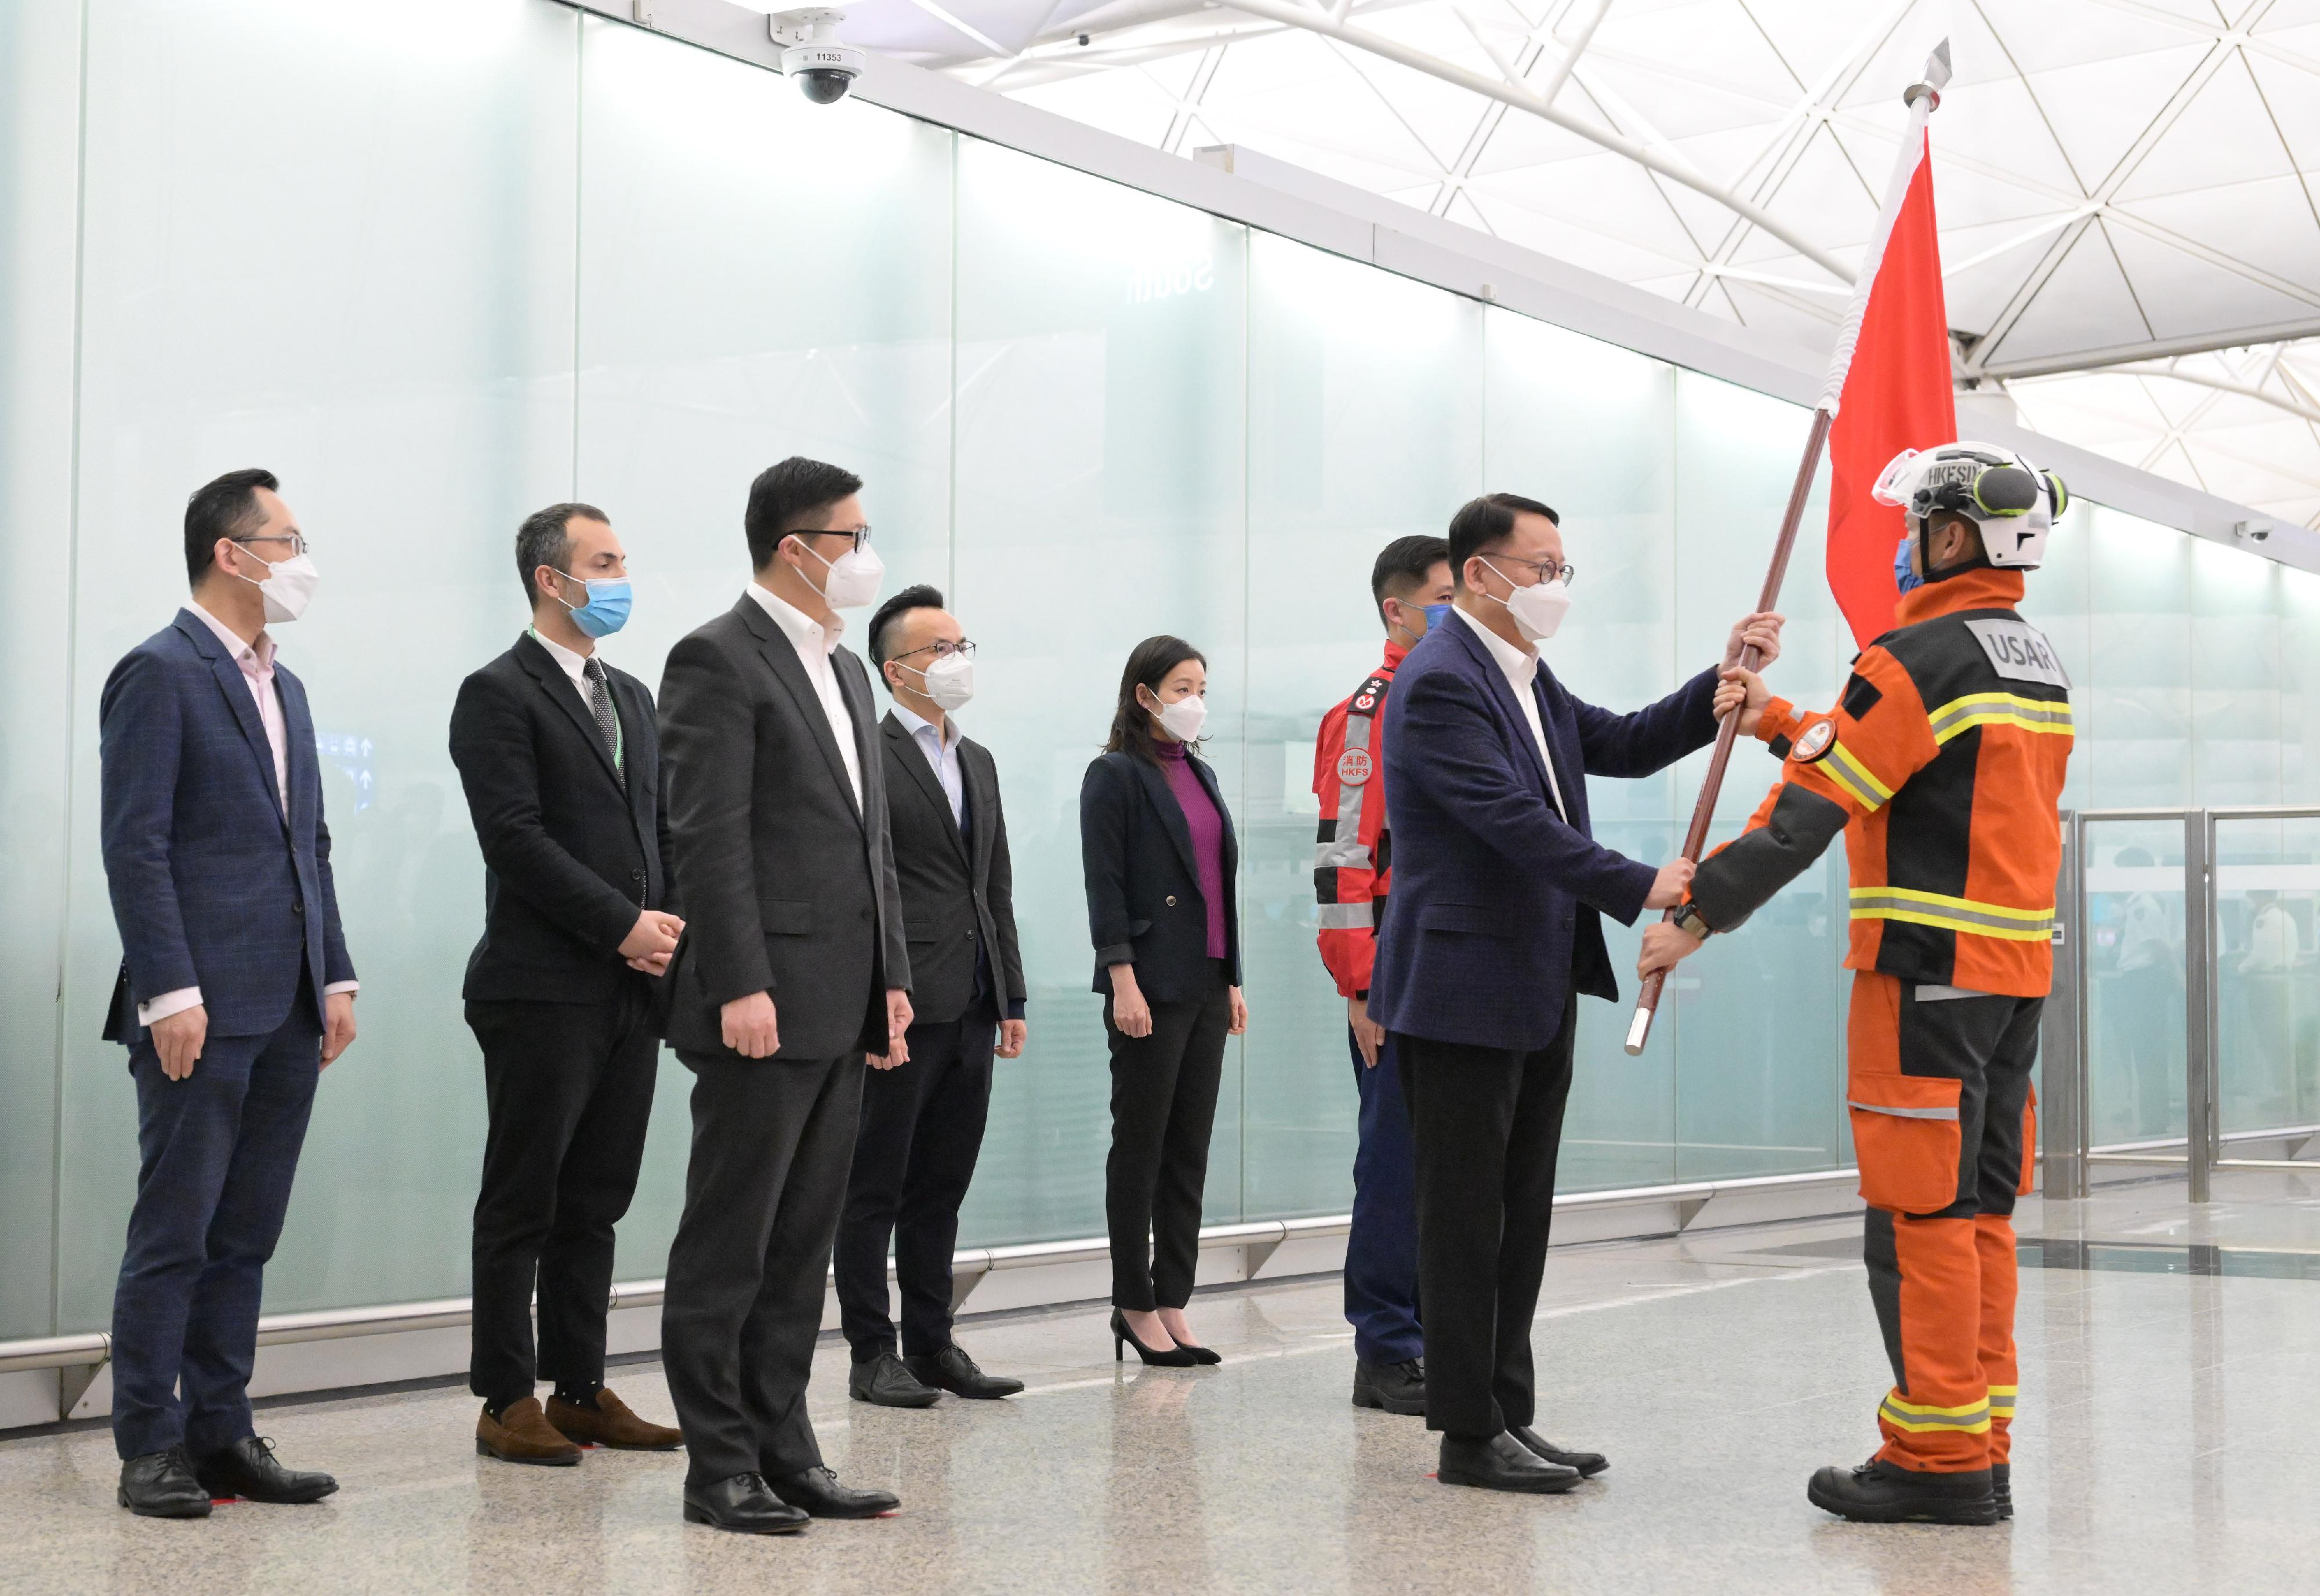 The Hong Kong Special Administrative Region (HKSAR) Government sent a 59-strong search and rescue team to the quake-stricken areas in Türkiye tonight (February 8) to assist in the search and rescue work. Photo shows the Acting Chief Executive, Mr Chan Kwok-ki (second right) presenting the flag to the representative of the HKSAR search and rescue team.